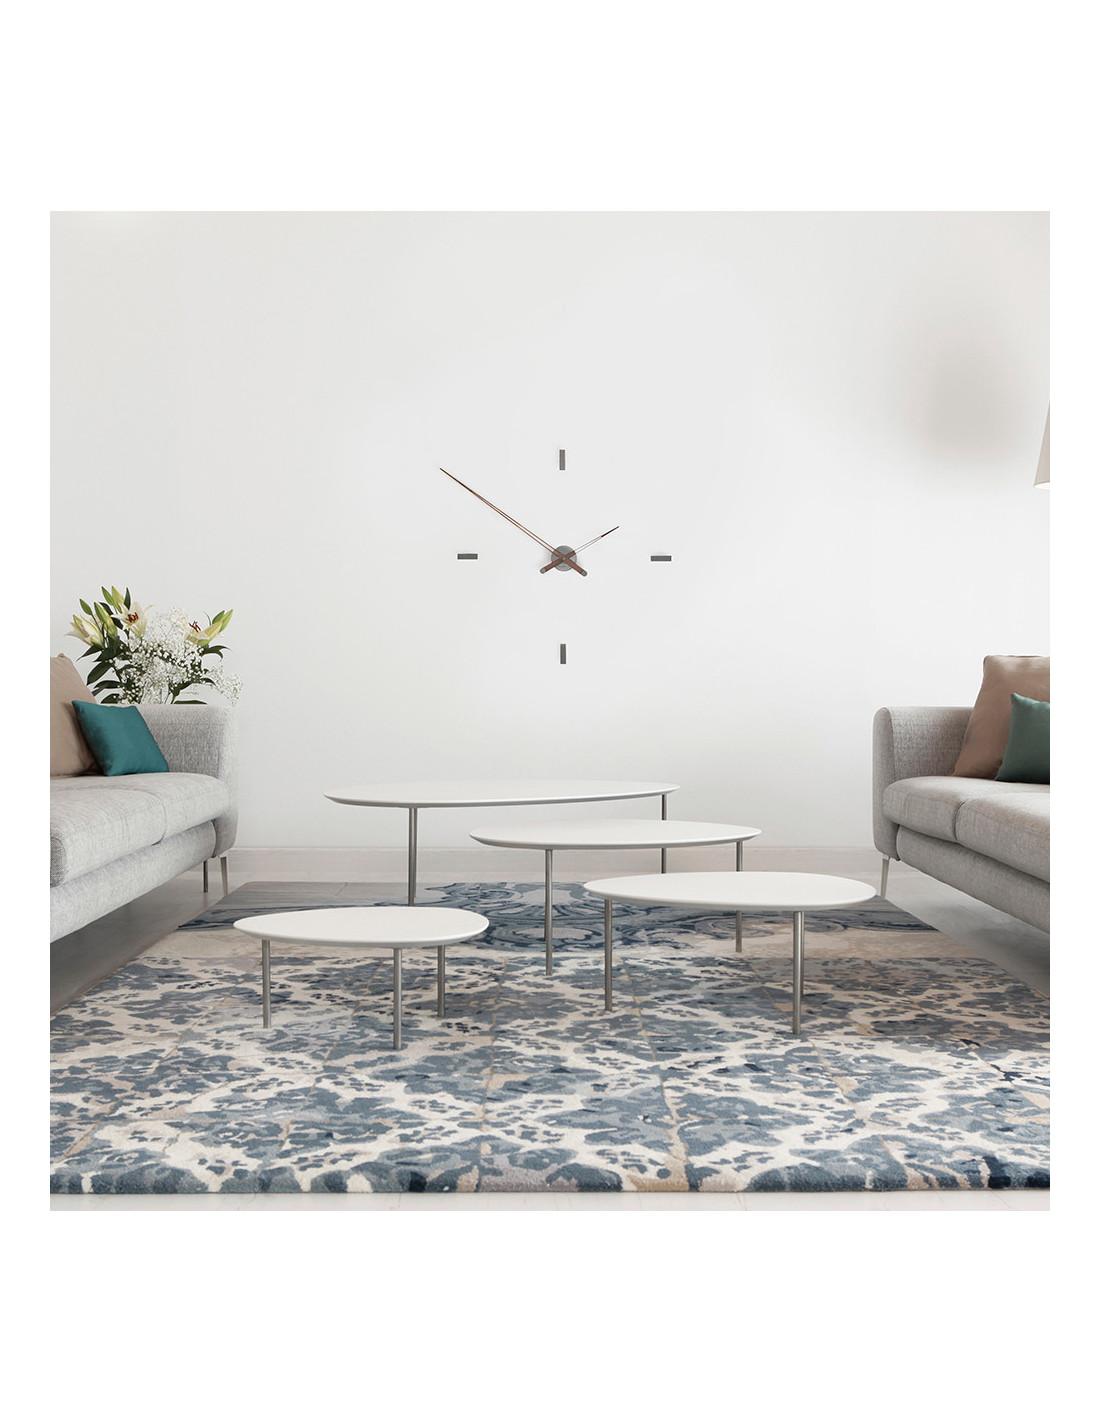 Tacón 4 T wall clock focuses exclusively on the essential details, which makes it Stand out for its Minimalist presence wherever you place it.
Tacón 4 T wall clock: graphite finished brass, hands in walnut.
Each clock is a unique handmade